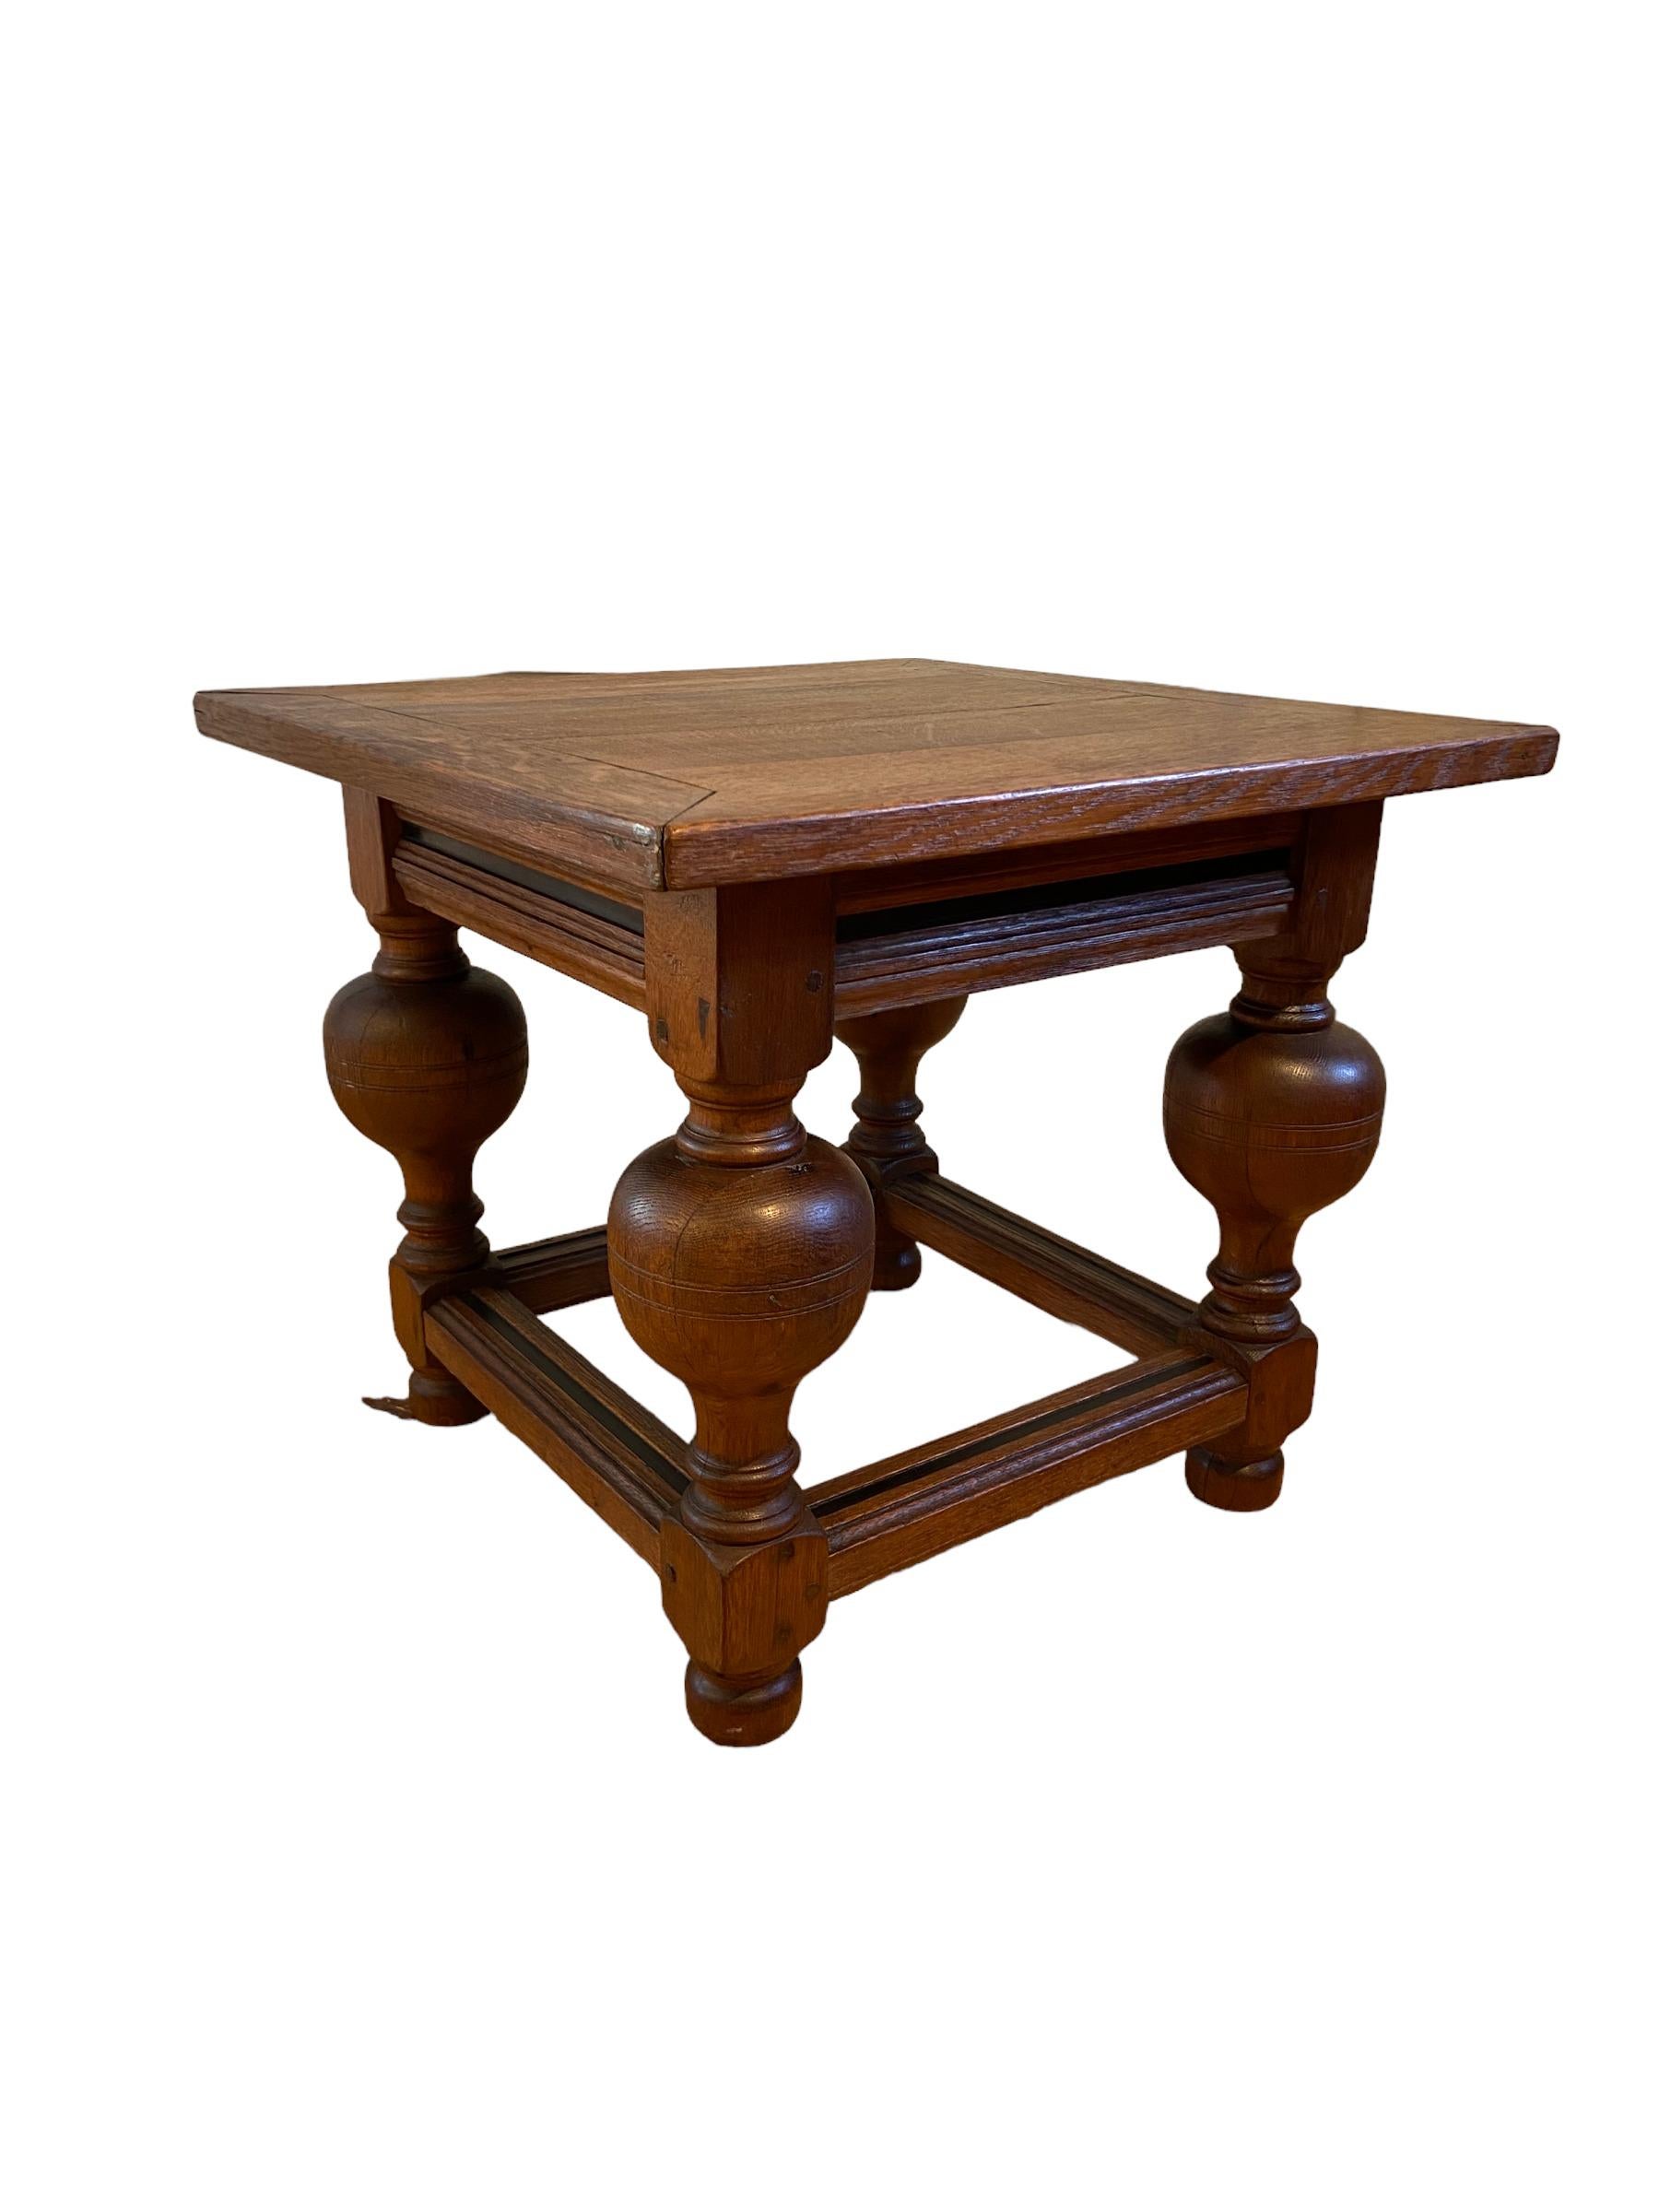 Neo-renaissance coffee table made in Holland. Oak wood with blackened accents. Approx 1900. Equipped with one blind drawer. This antique object is in a good condition but it shows sign of age.